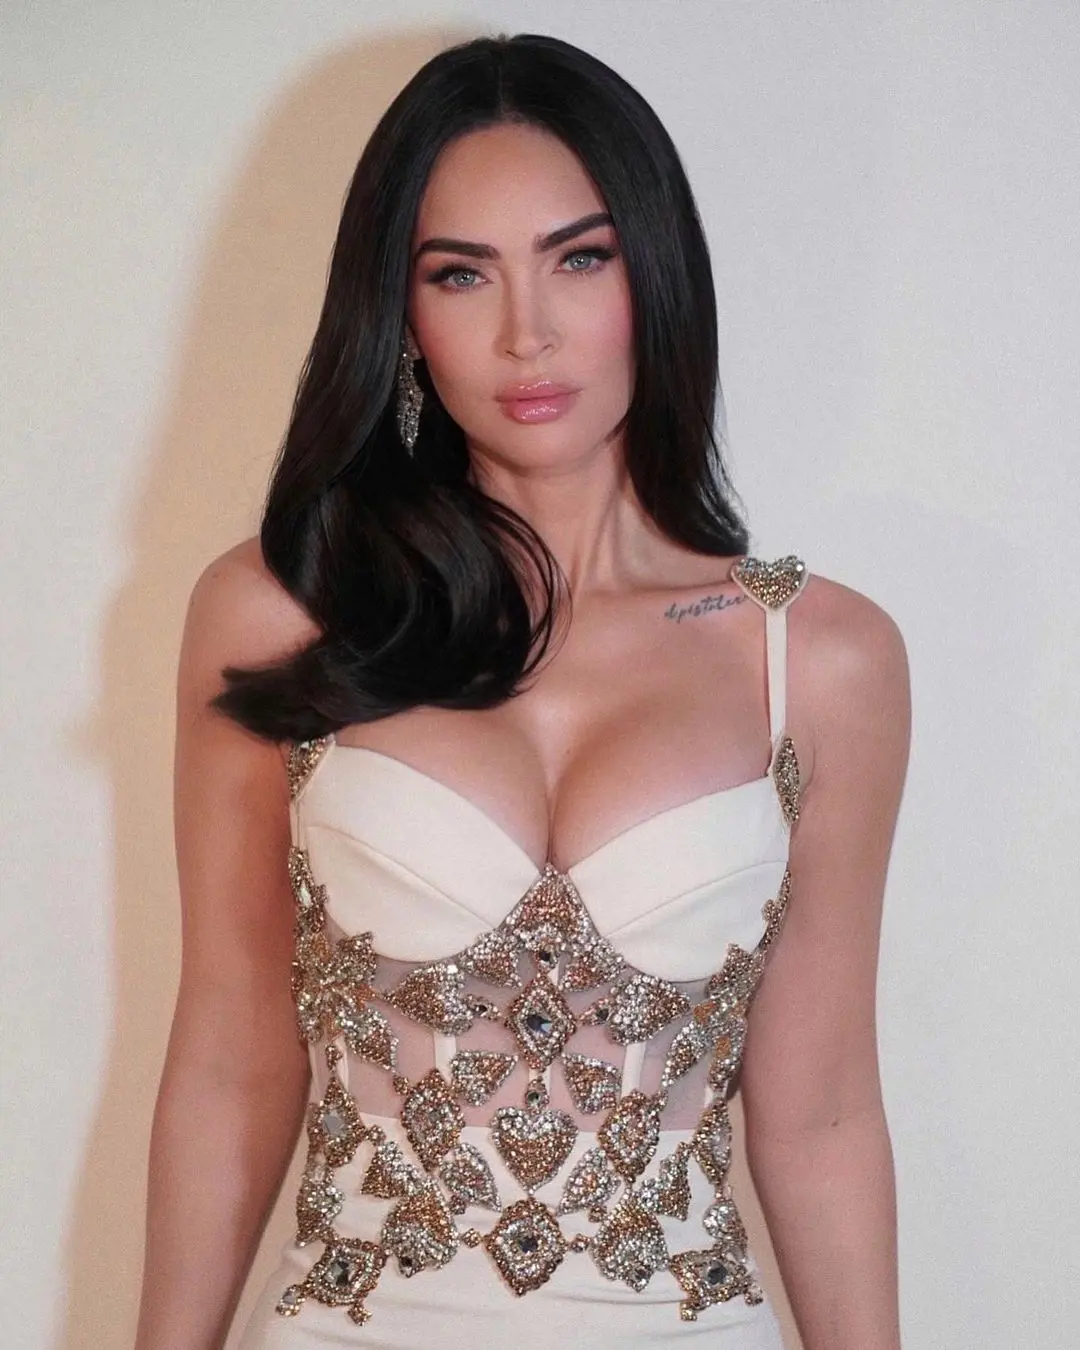 Megan fox looking angelic at the Grammys